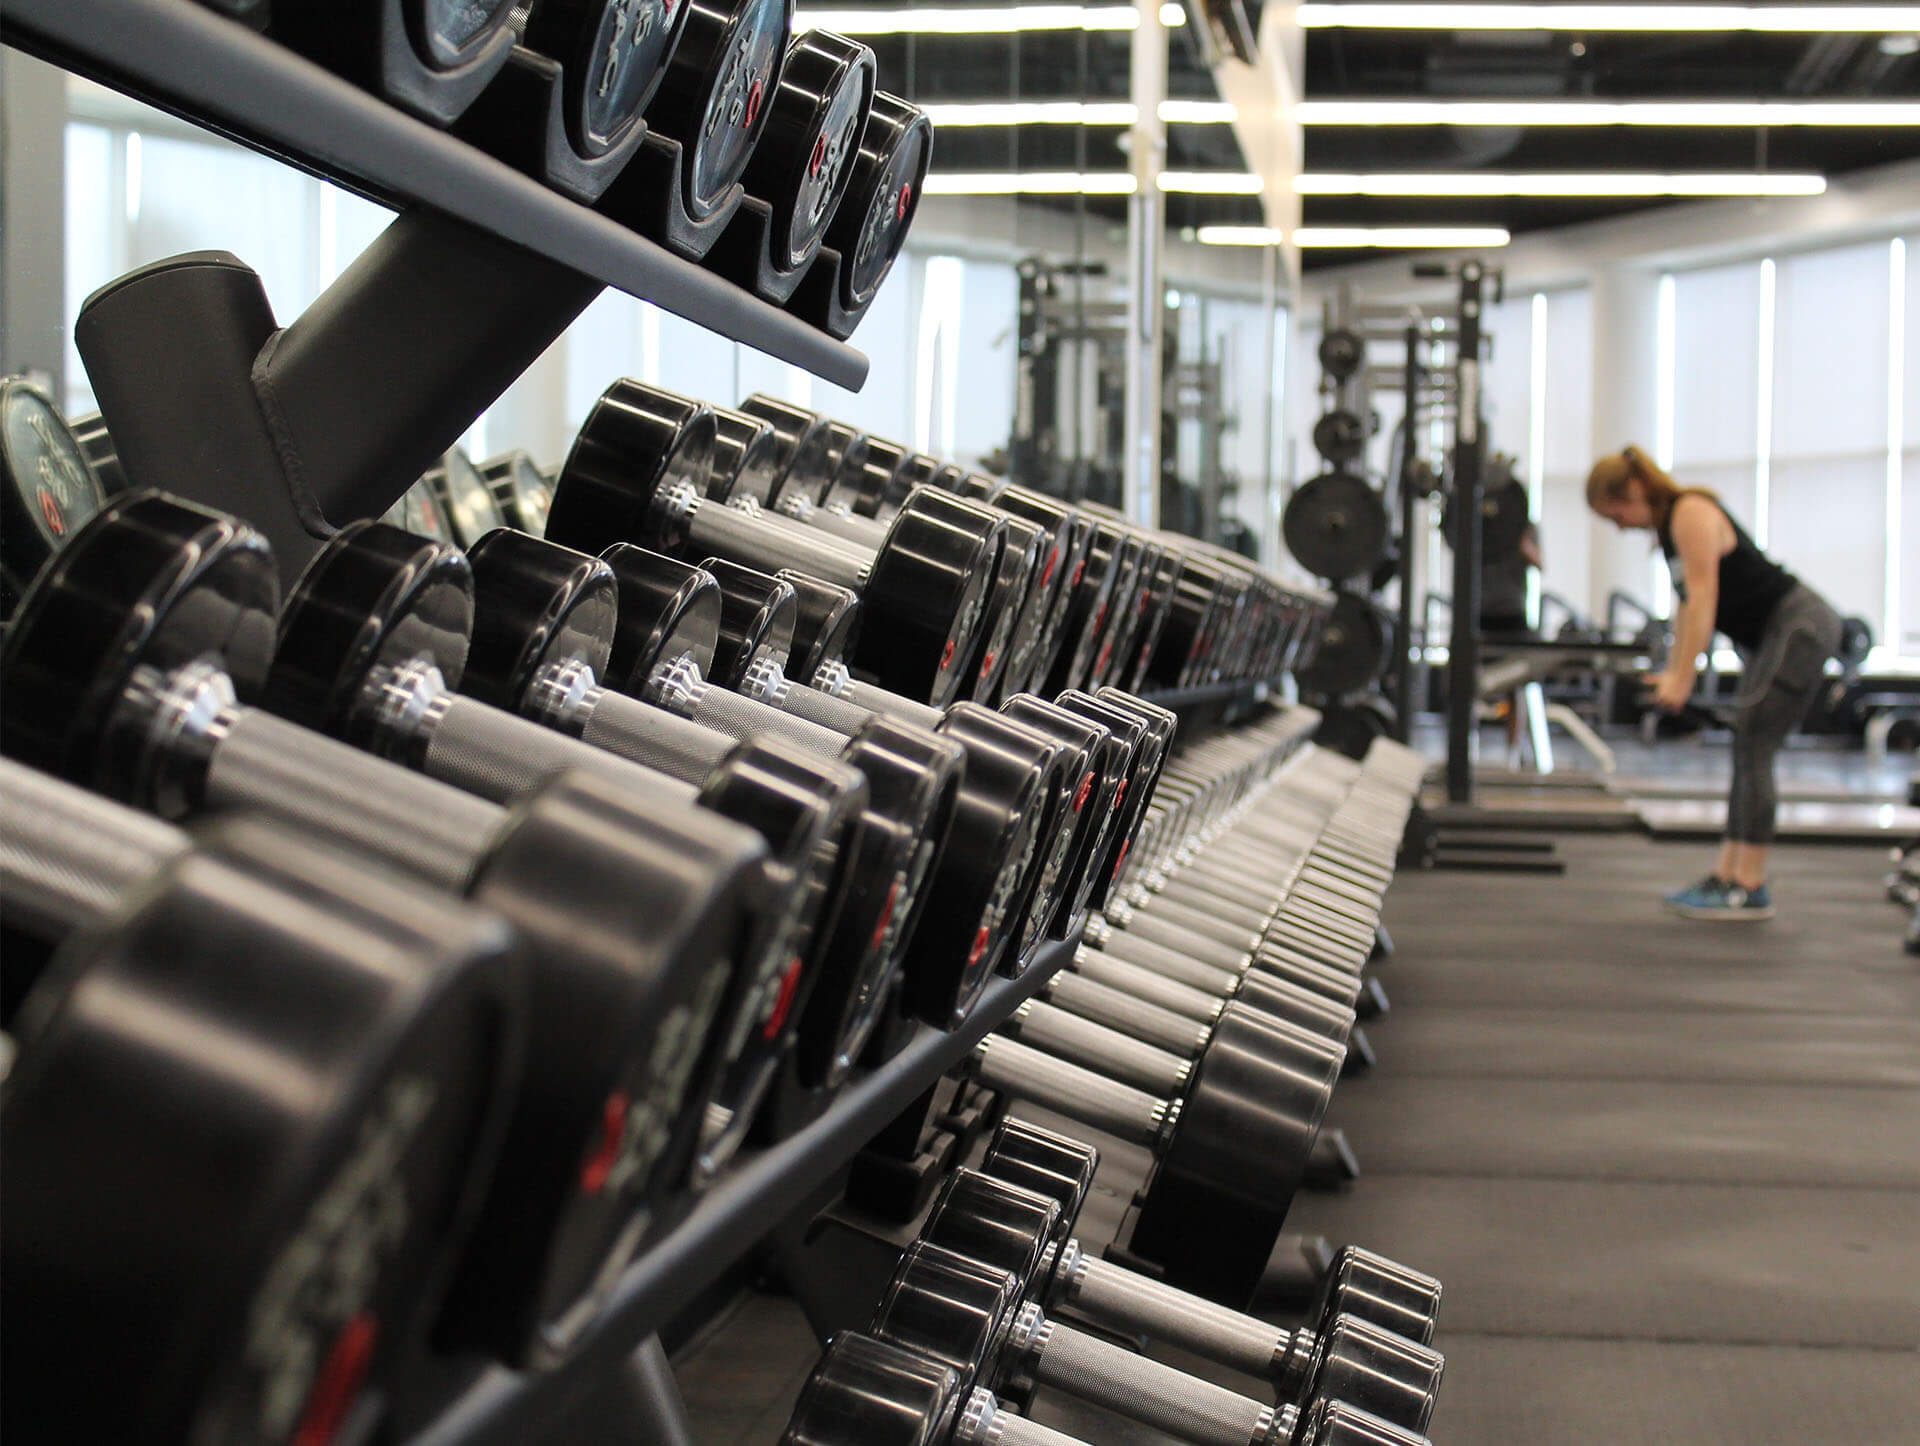 You are currently viewing Planning makes perfect – Meet the Ternal Fitness Center